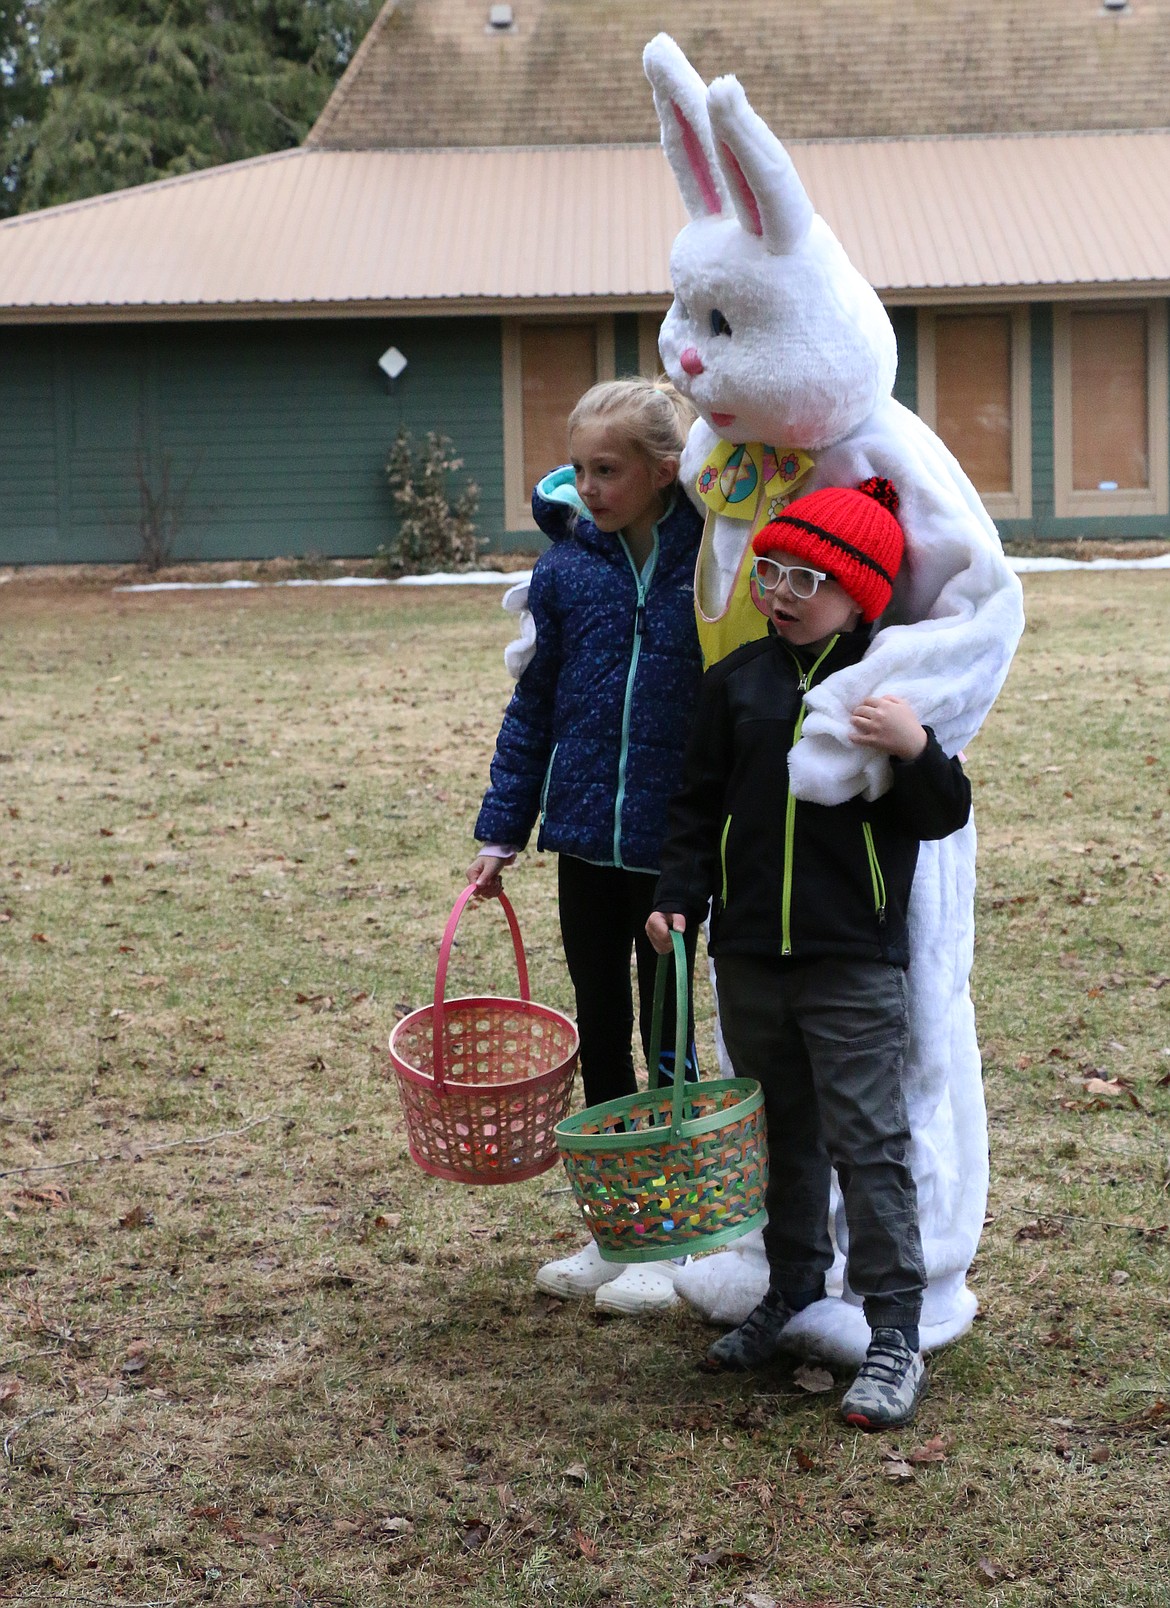 A pair get their photo taken with the Easter Bunny during the Sandpoint Lions annual Easter egg hunt at Lakeview Park on Saturday.